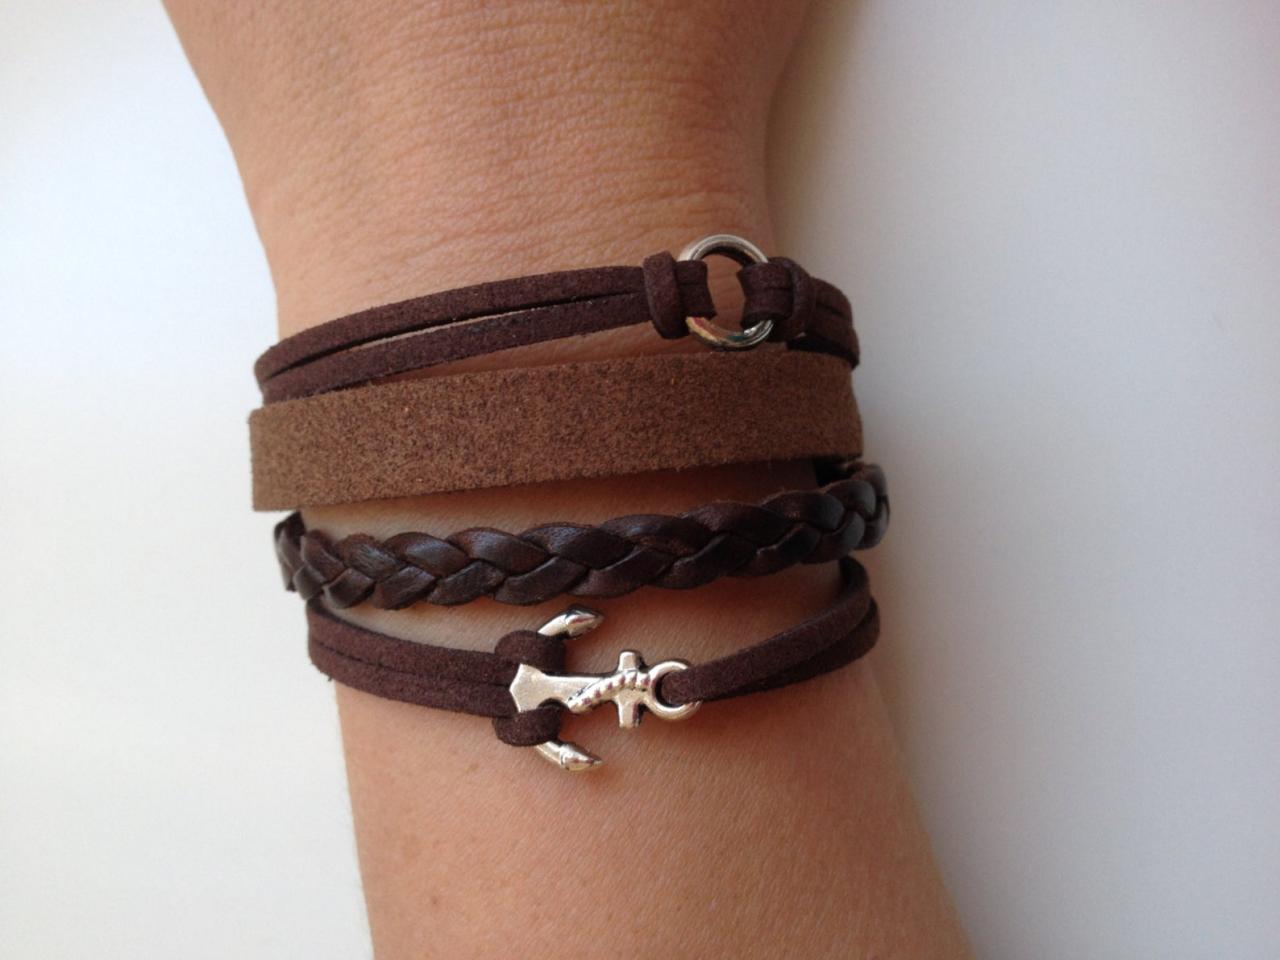 Anchor Leather Bracelet 3 - Friendship Cuff Anchor Bracelet Brown Leather Braid Gift Adjustable Current Womenswear Unique Innovative